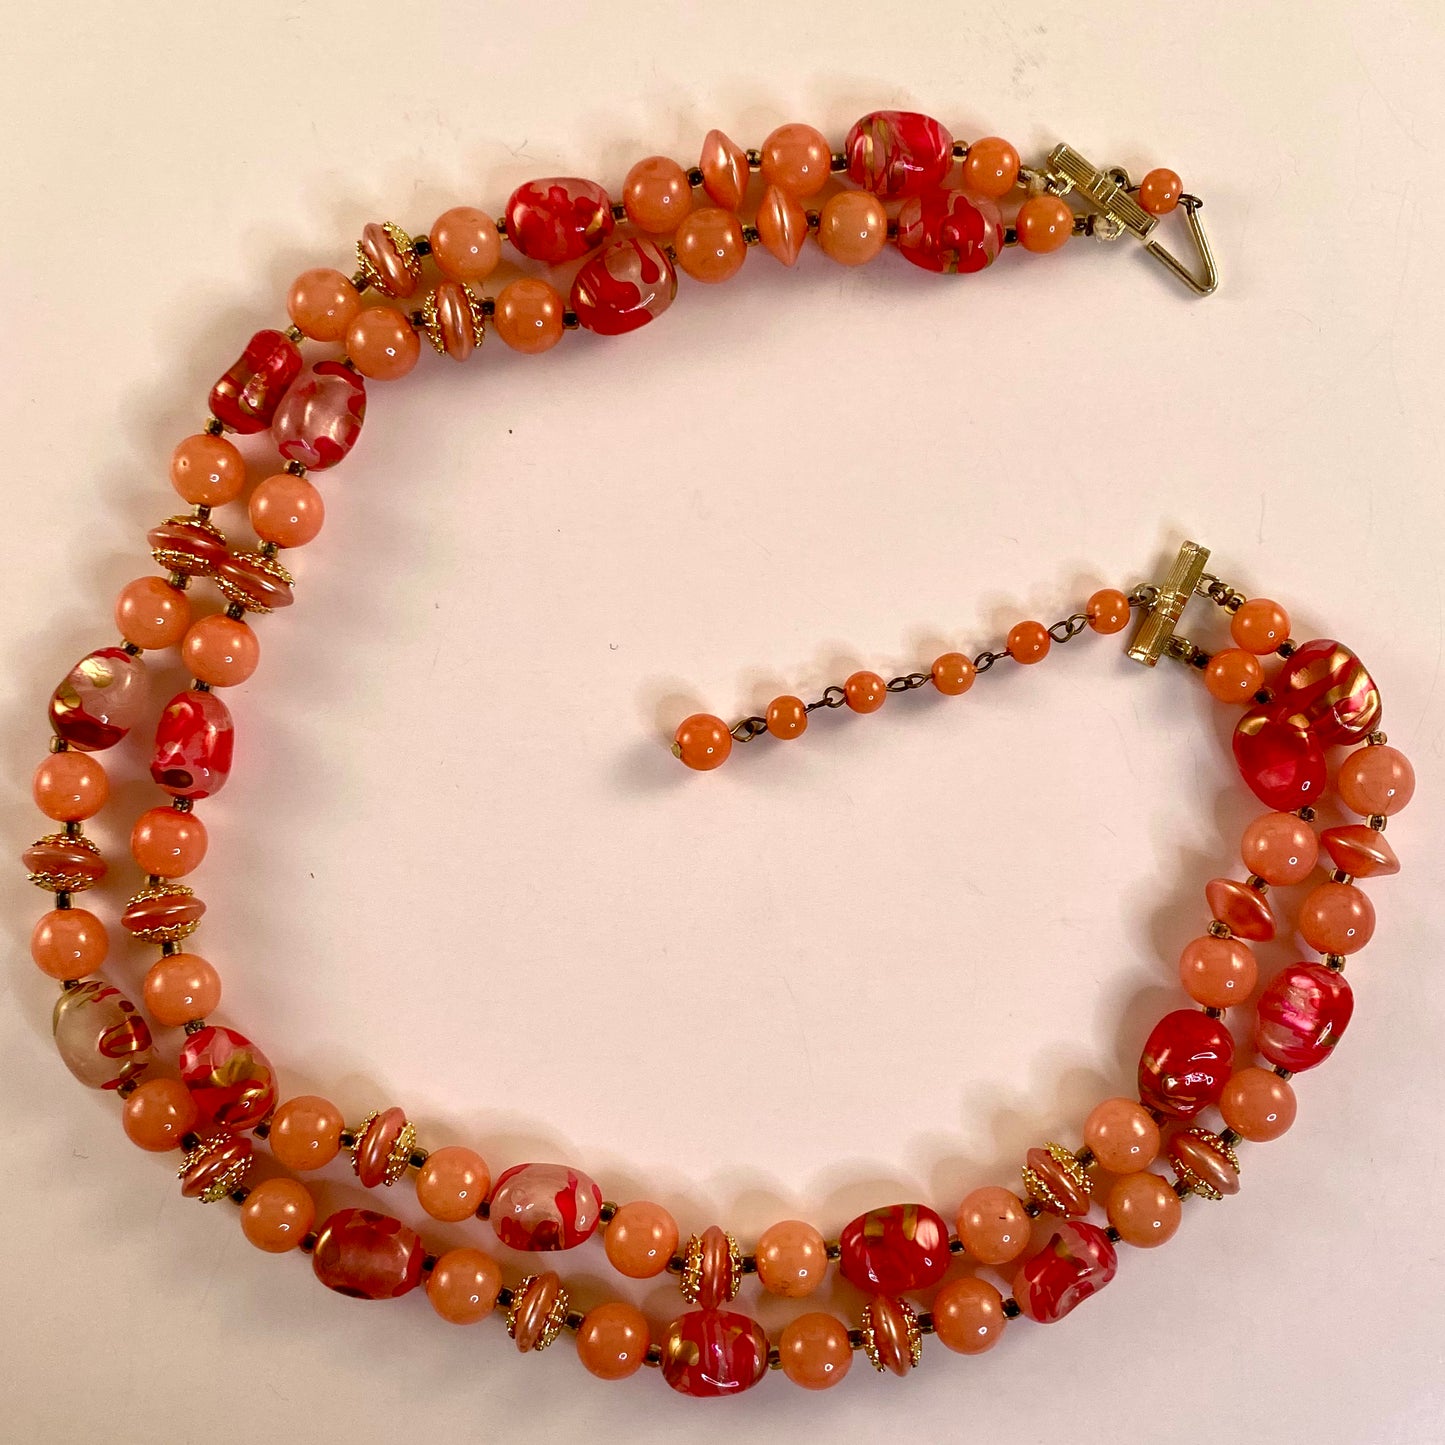 1960s Hong Kong Double Strand Bead Necklace